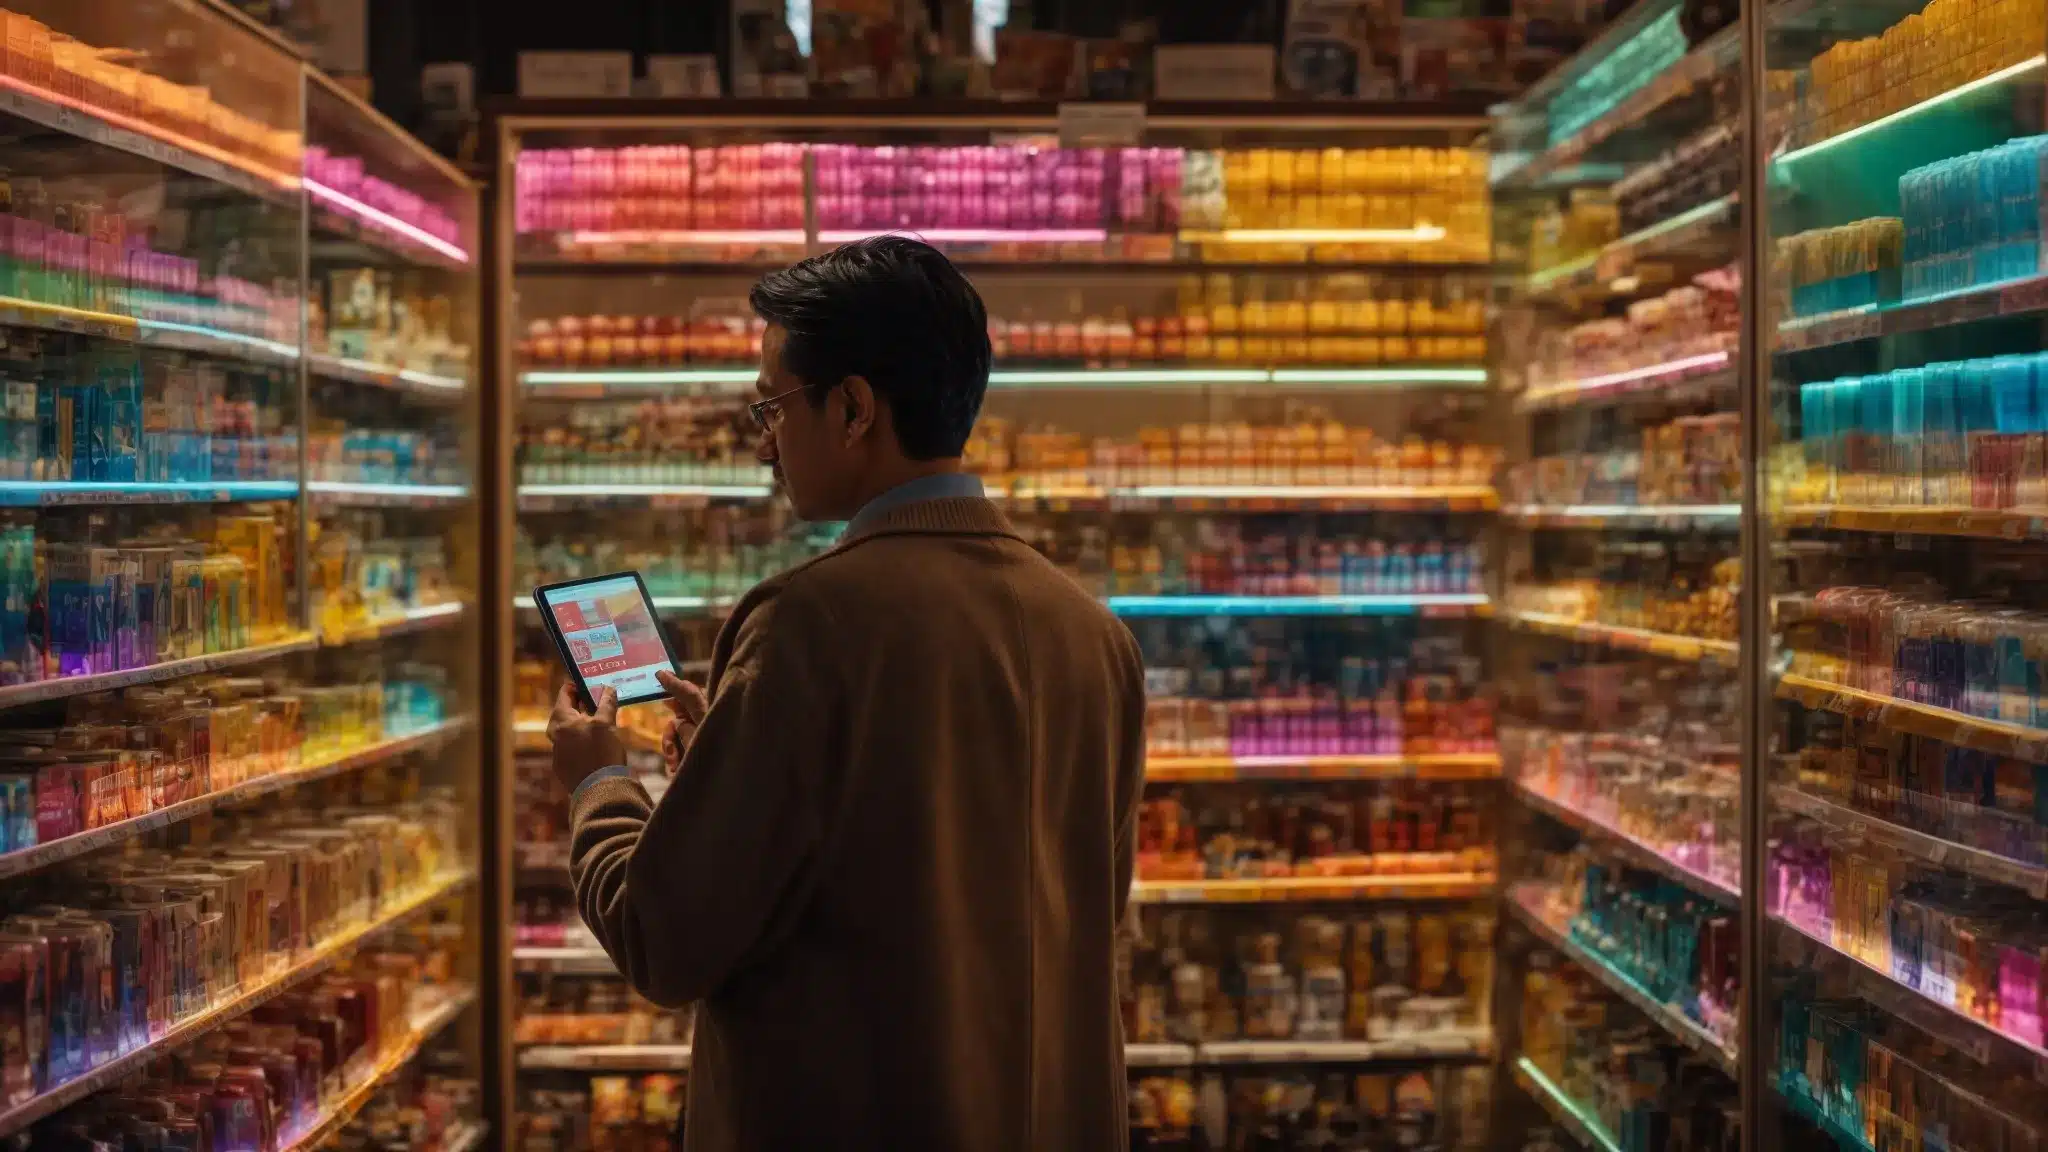 A Local Shopkeeper Consults A Tablet Displaying Colorful Analytics Graphs Amidst A Vibrant Array Of Products On Shelves.